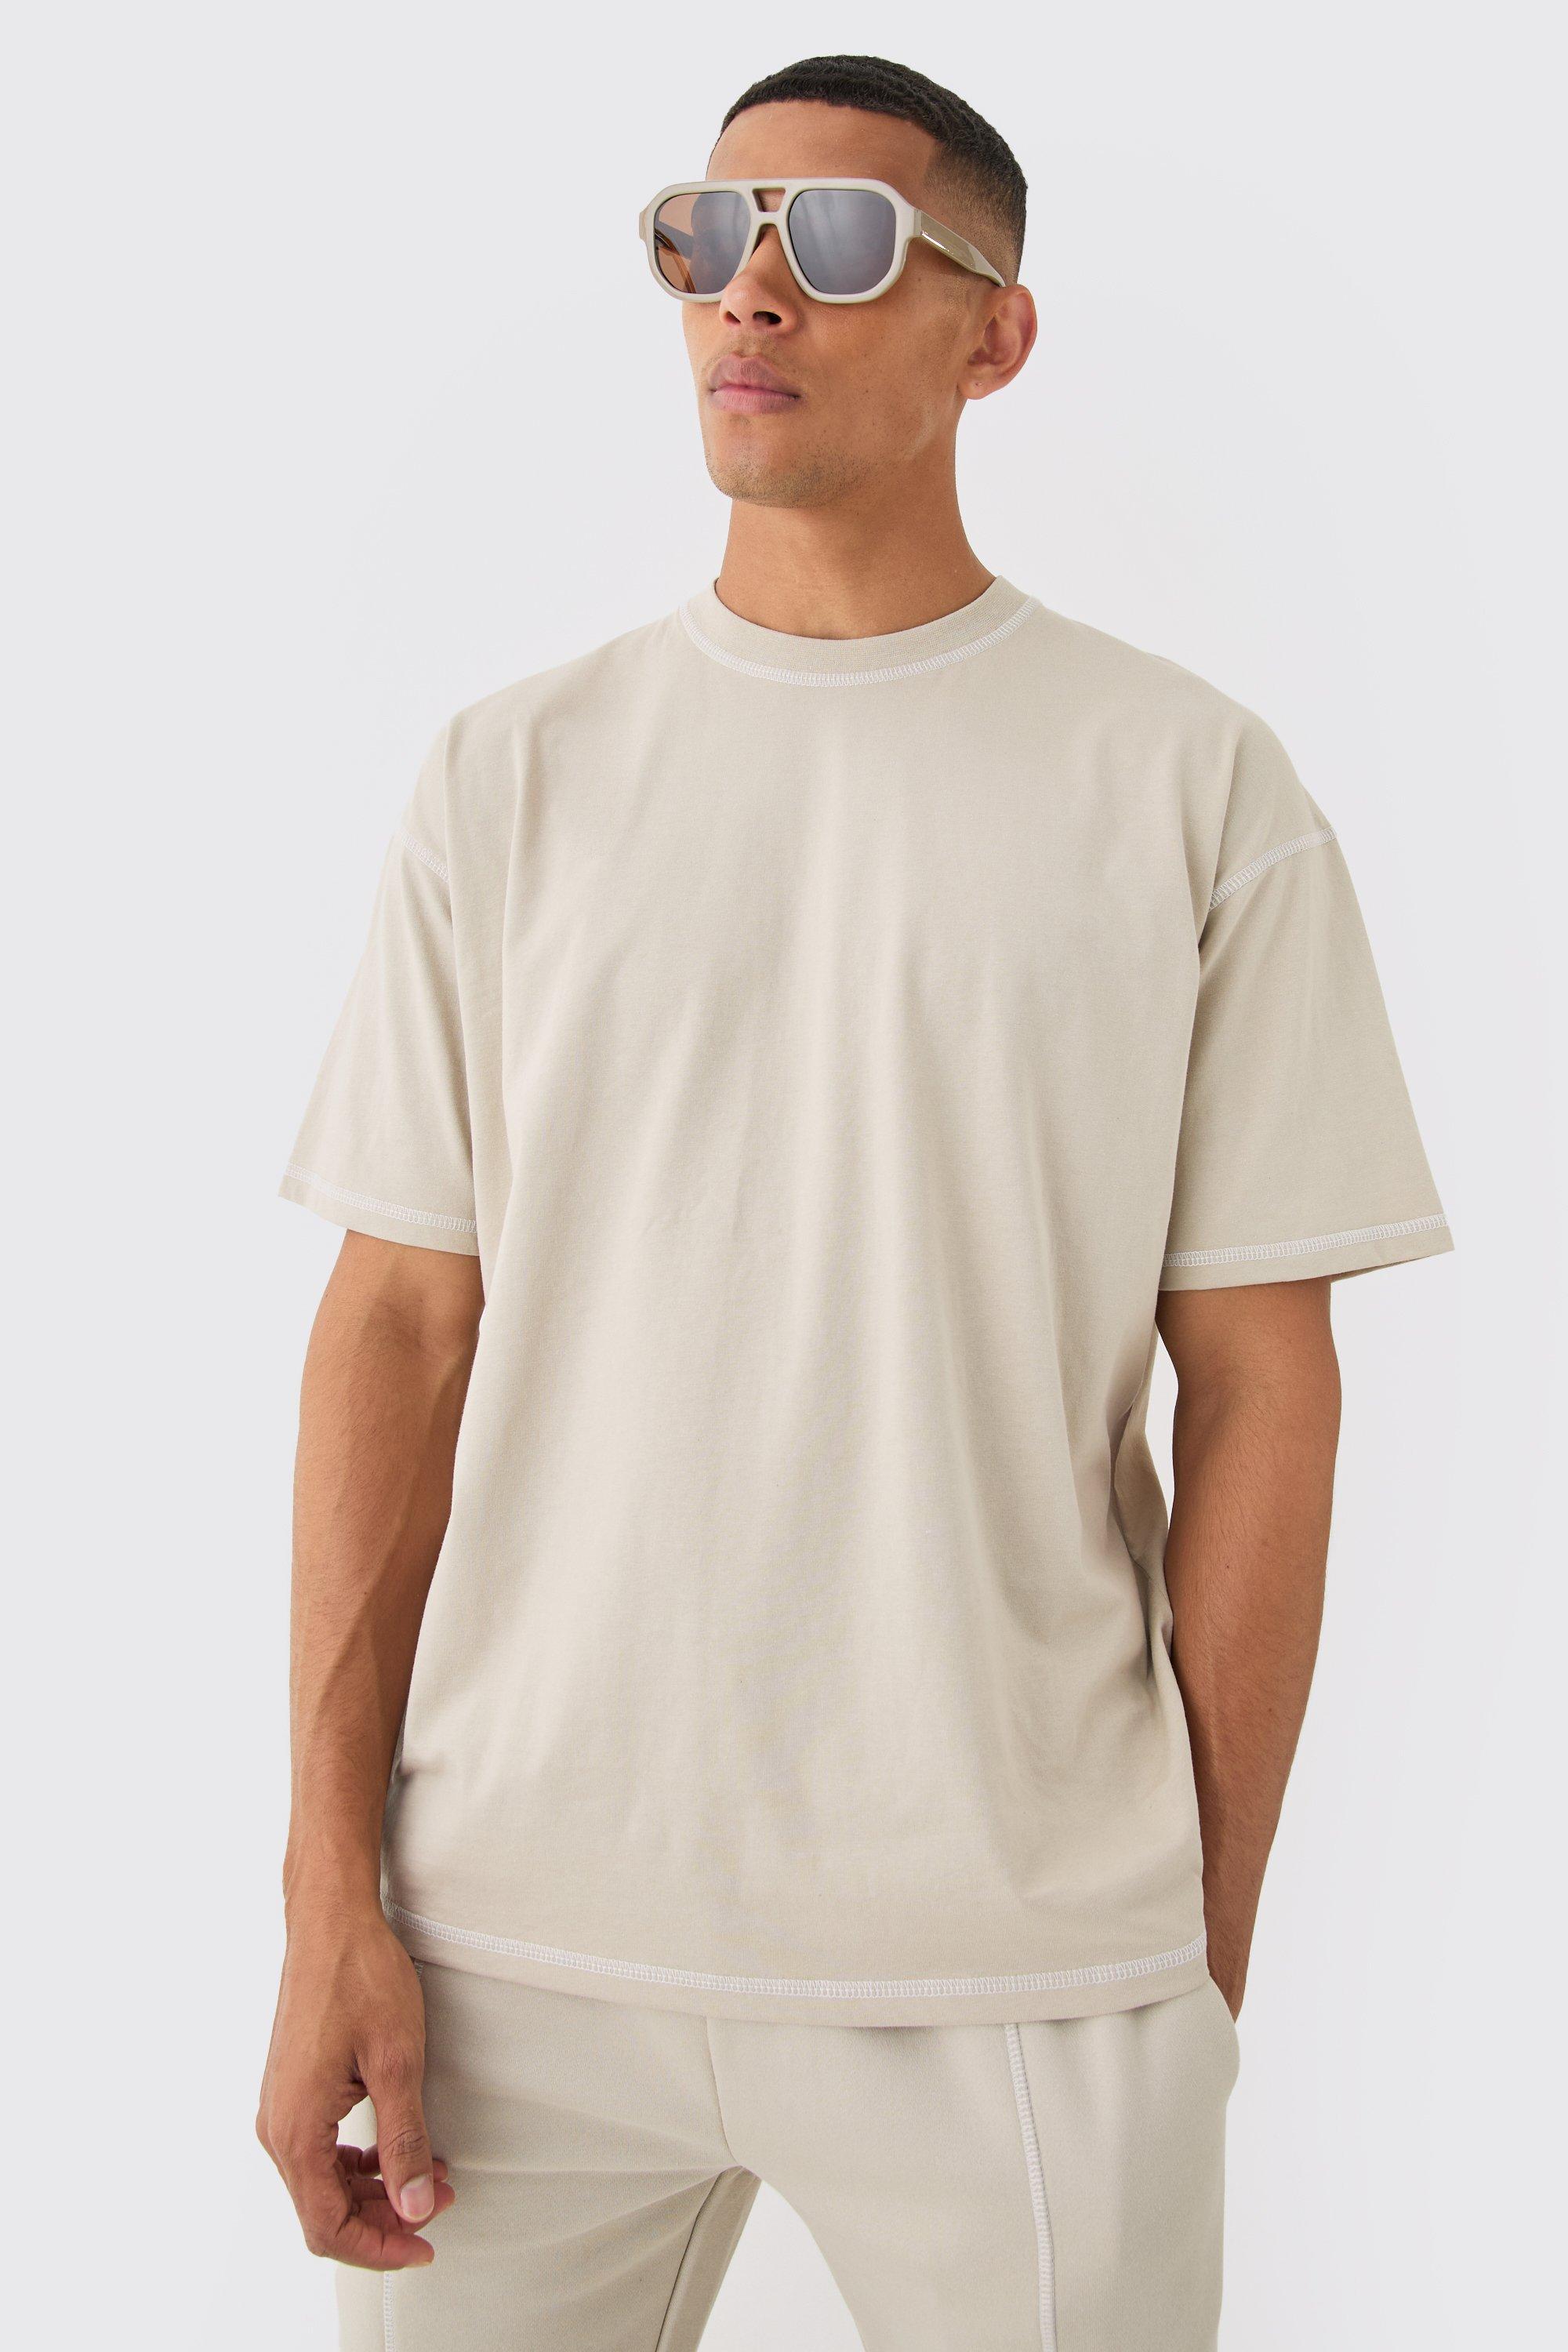 Image of Oversized Contrast Stitch Extended Neck Embroidered T-shirt, Beige